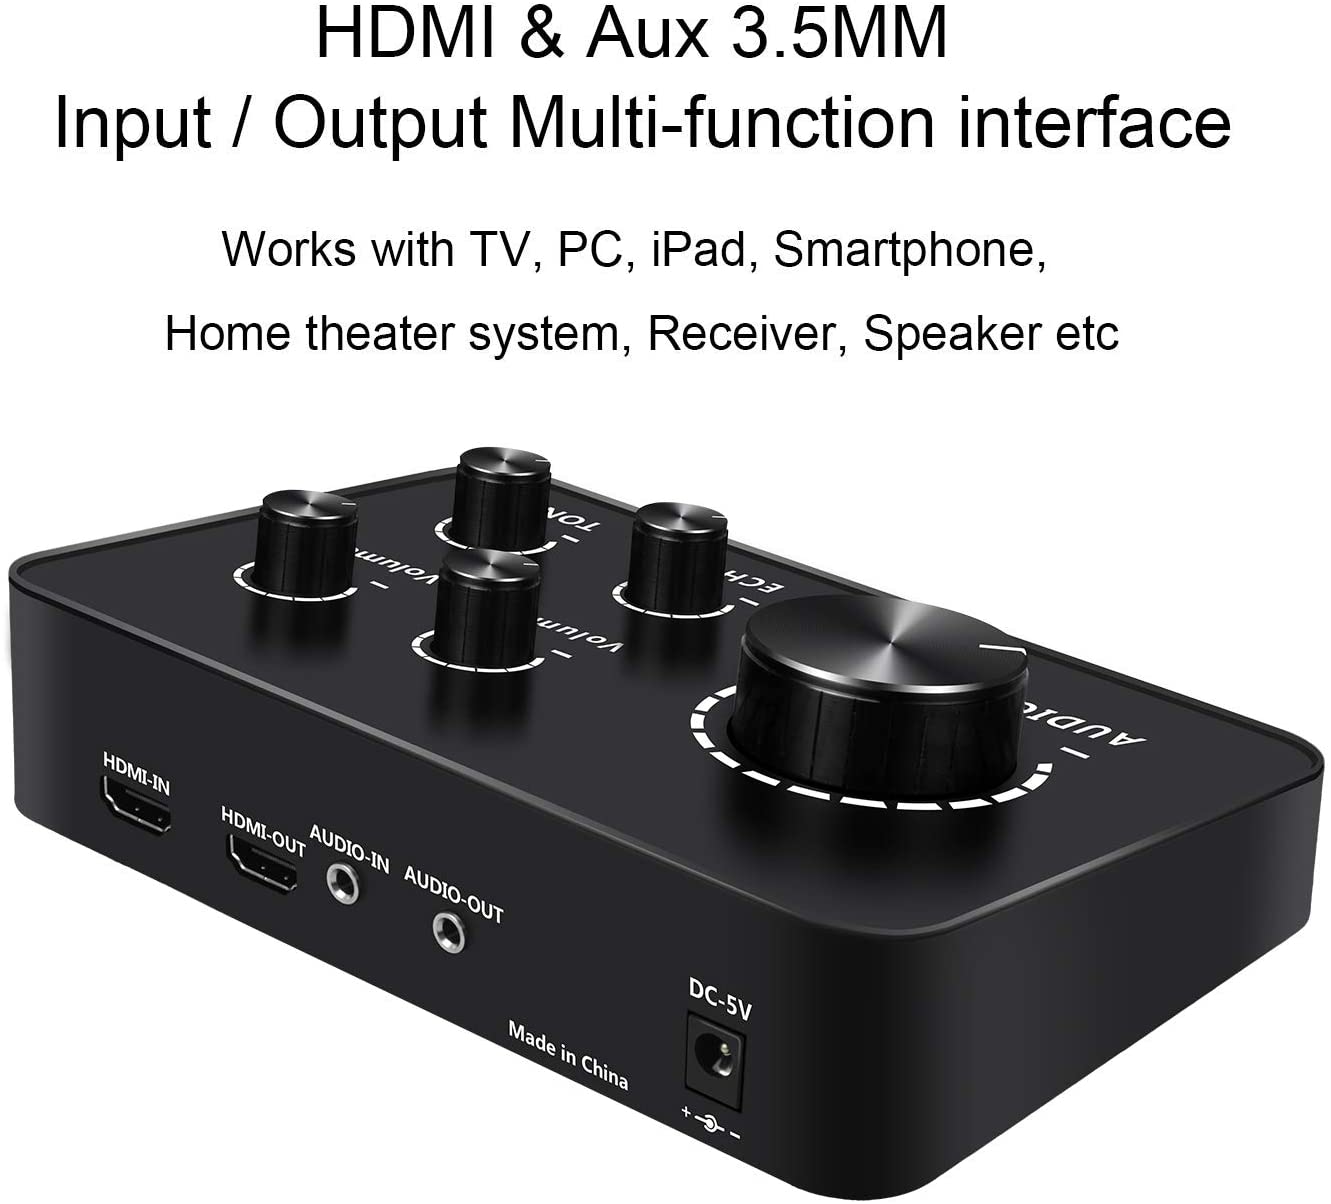 Portable Karaoke Microphone Mixer System Set, with Dual UHF Wireless Mic, HDMI & AUX In/Out for Karaoke, Home Theater, Amplifier, Speaker